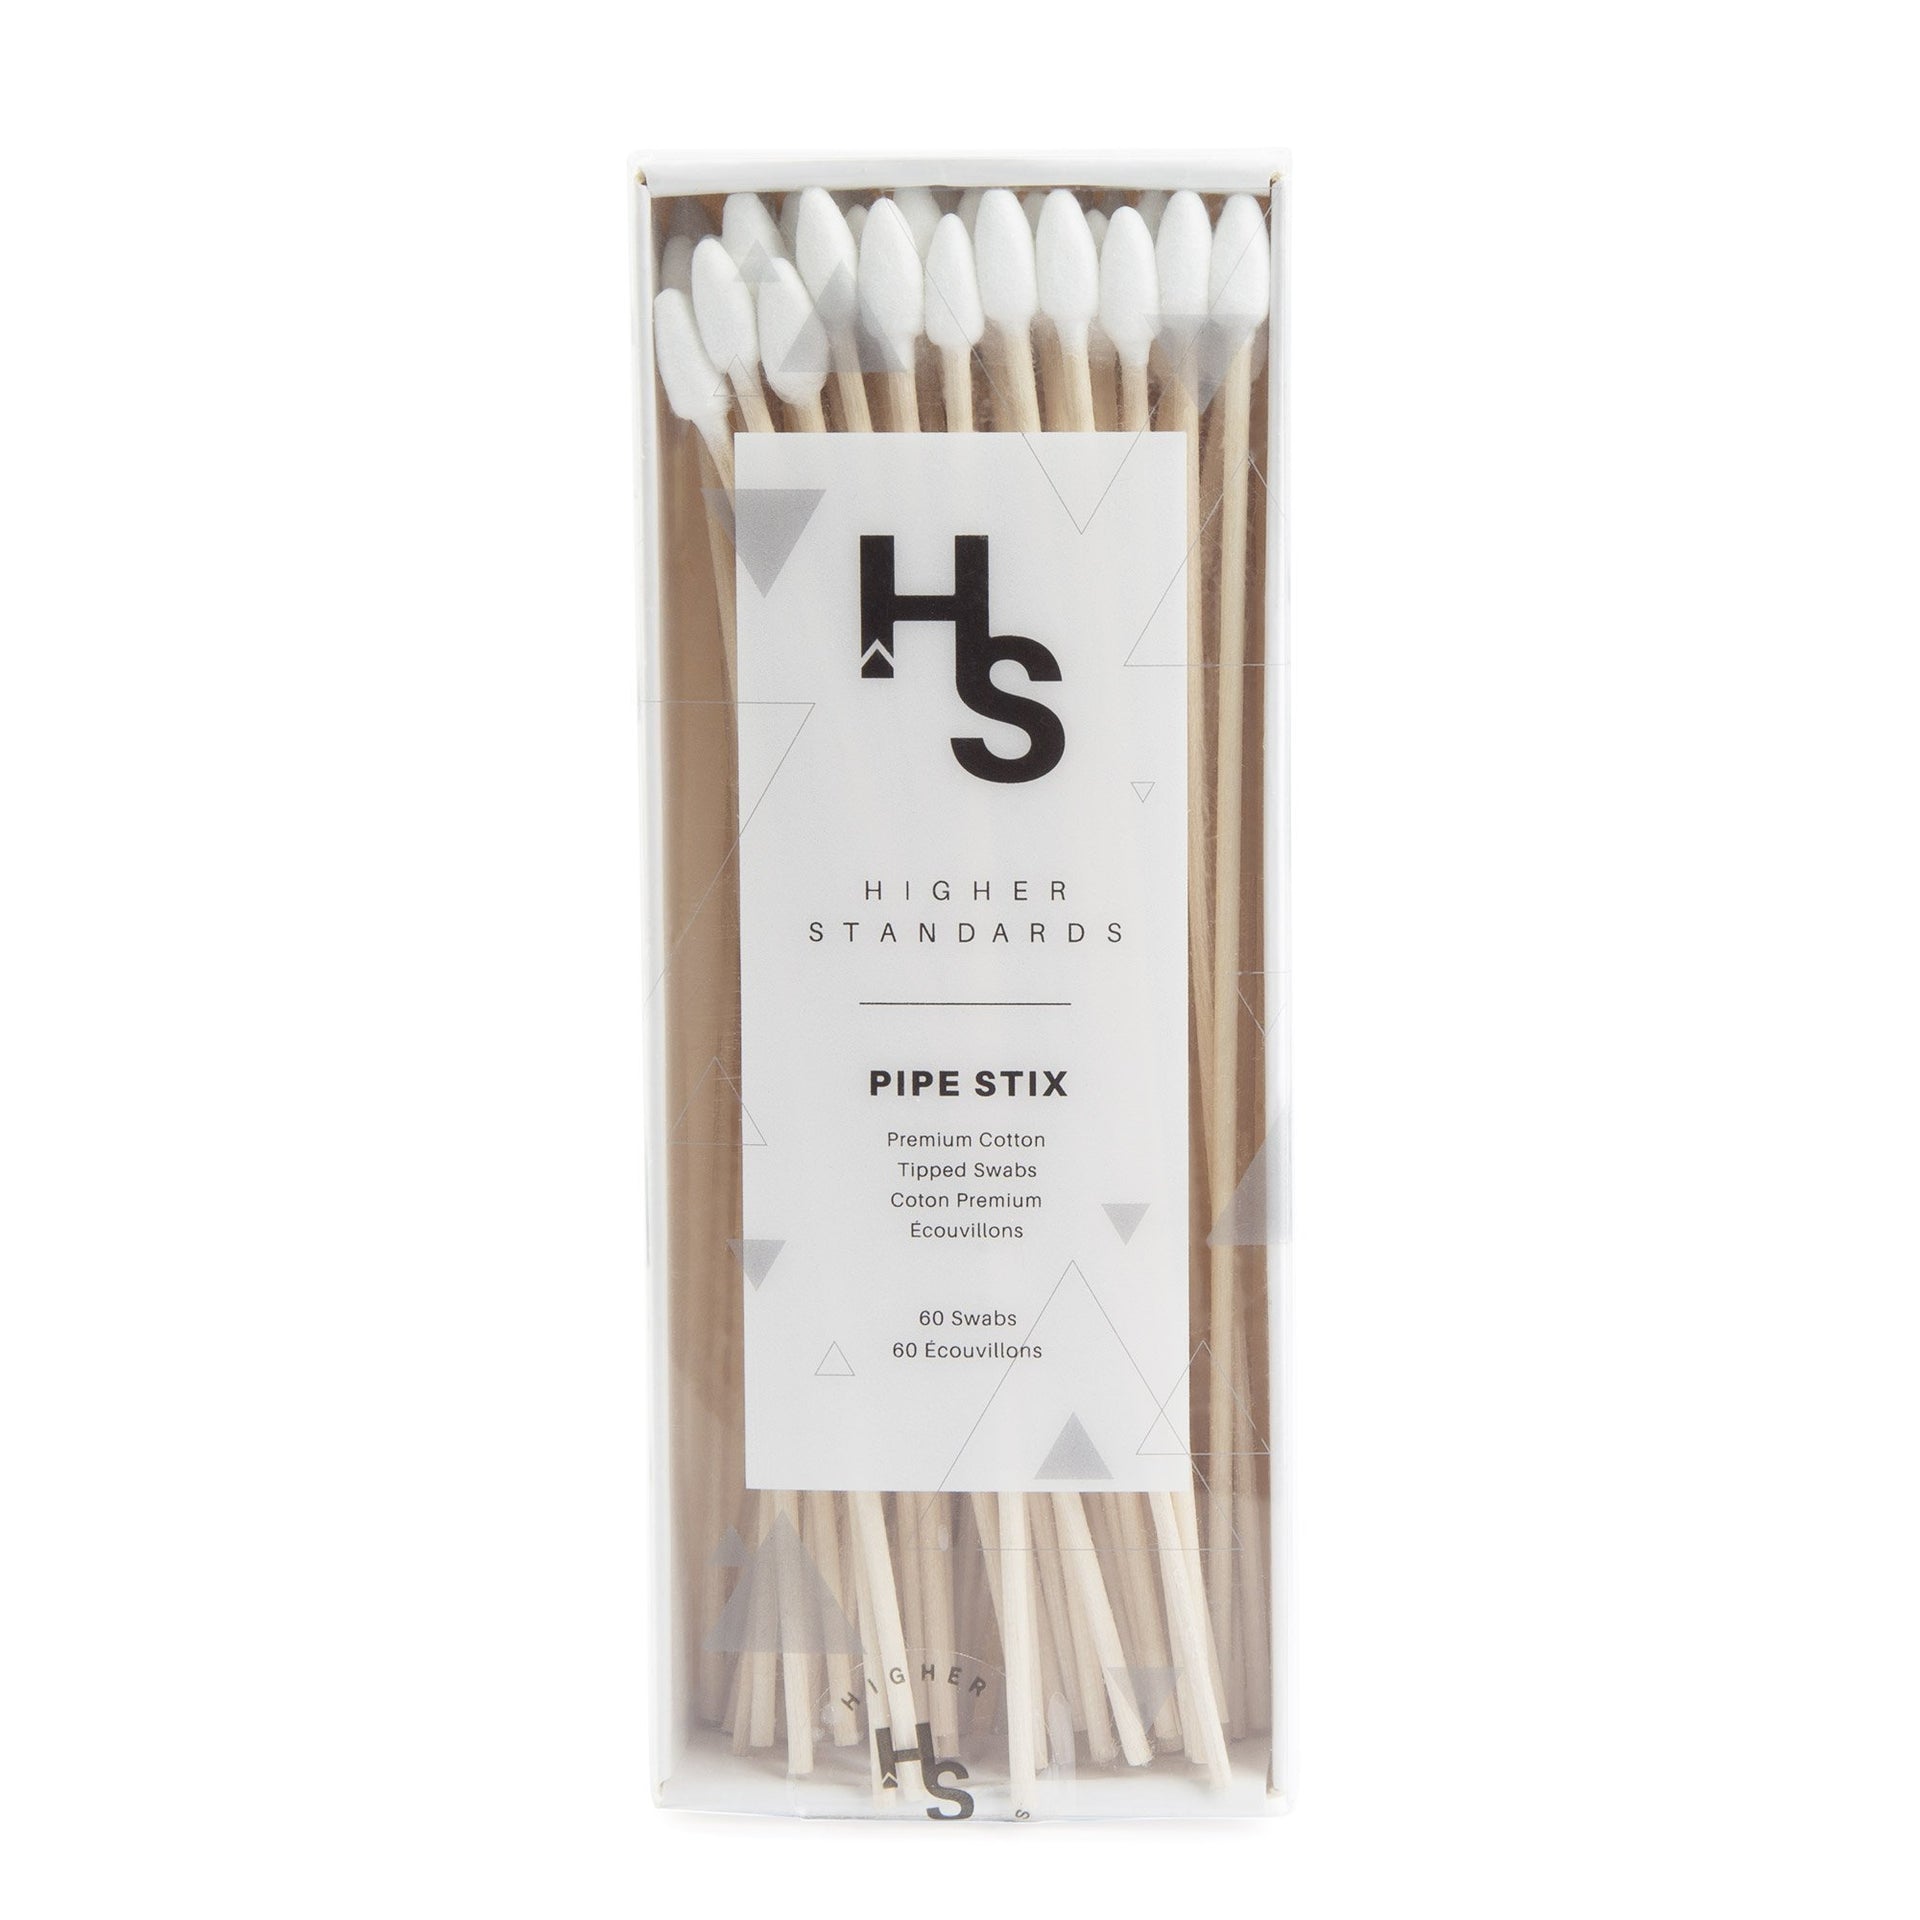 Higher Standards Pipe Stix Cleaning Swabs - 420 Science - The most trusted online smoke shop.